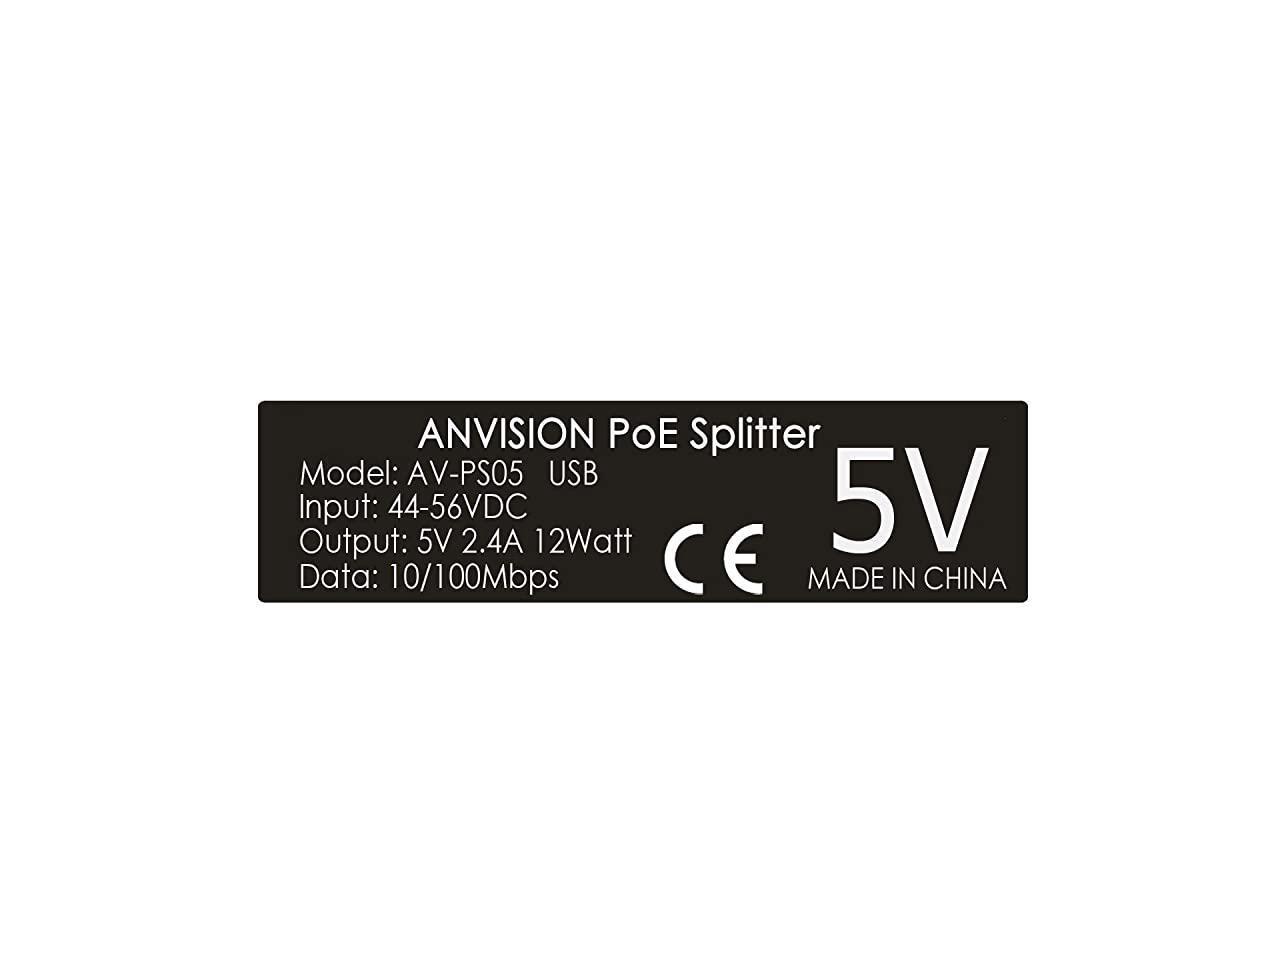 Dropcam or Raspberry Pi IPC ANVISION Active 5V 2.4A PoE Splitter Adapter IEEE 802.3af Compliant Micro USB 48V to 5V/2.4A for Tablets IP Camera and More 